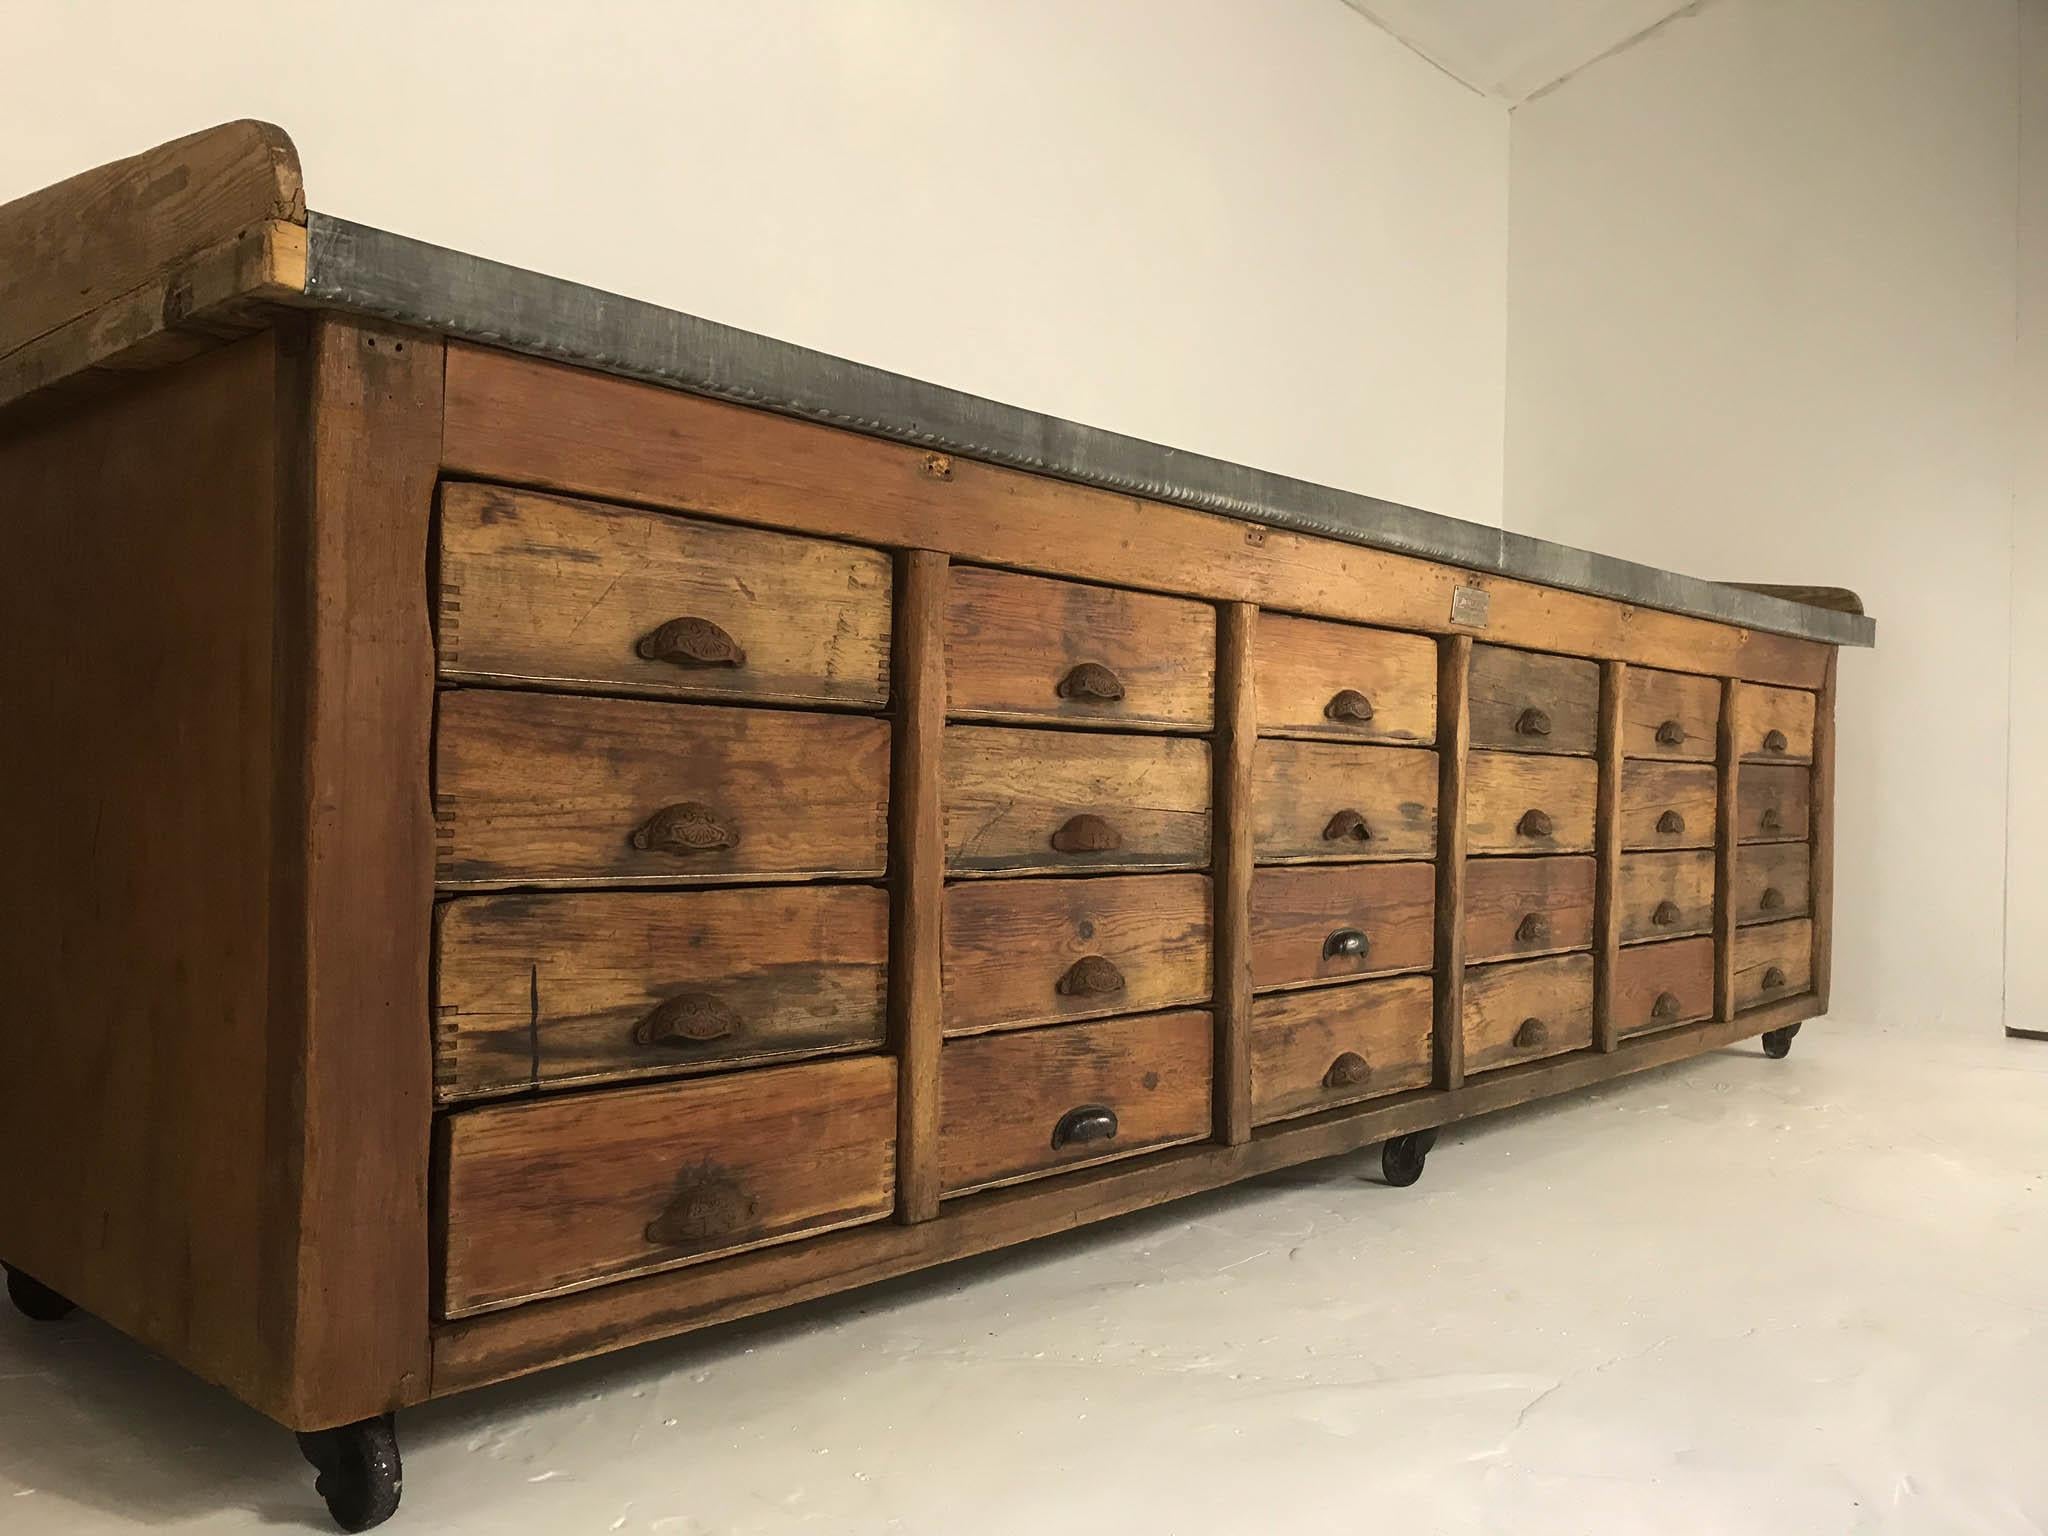 Huge pine table rescued from a bakery in Newcastle, England. Manufactured in the 1940s by Terrington & Sons, Portsmouth the renowned makers of bakery products. Features 24 drawers with cast iron handles, aged zinc top and castors.
A truly unique